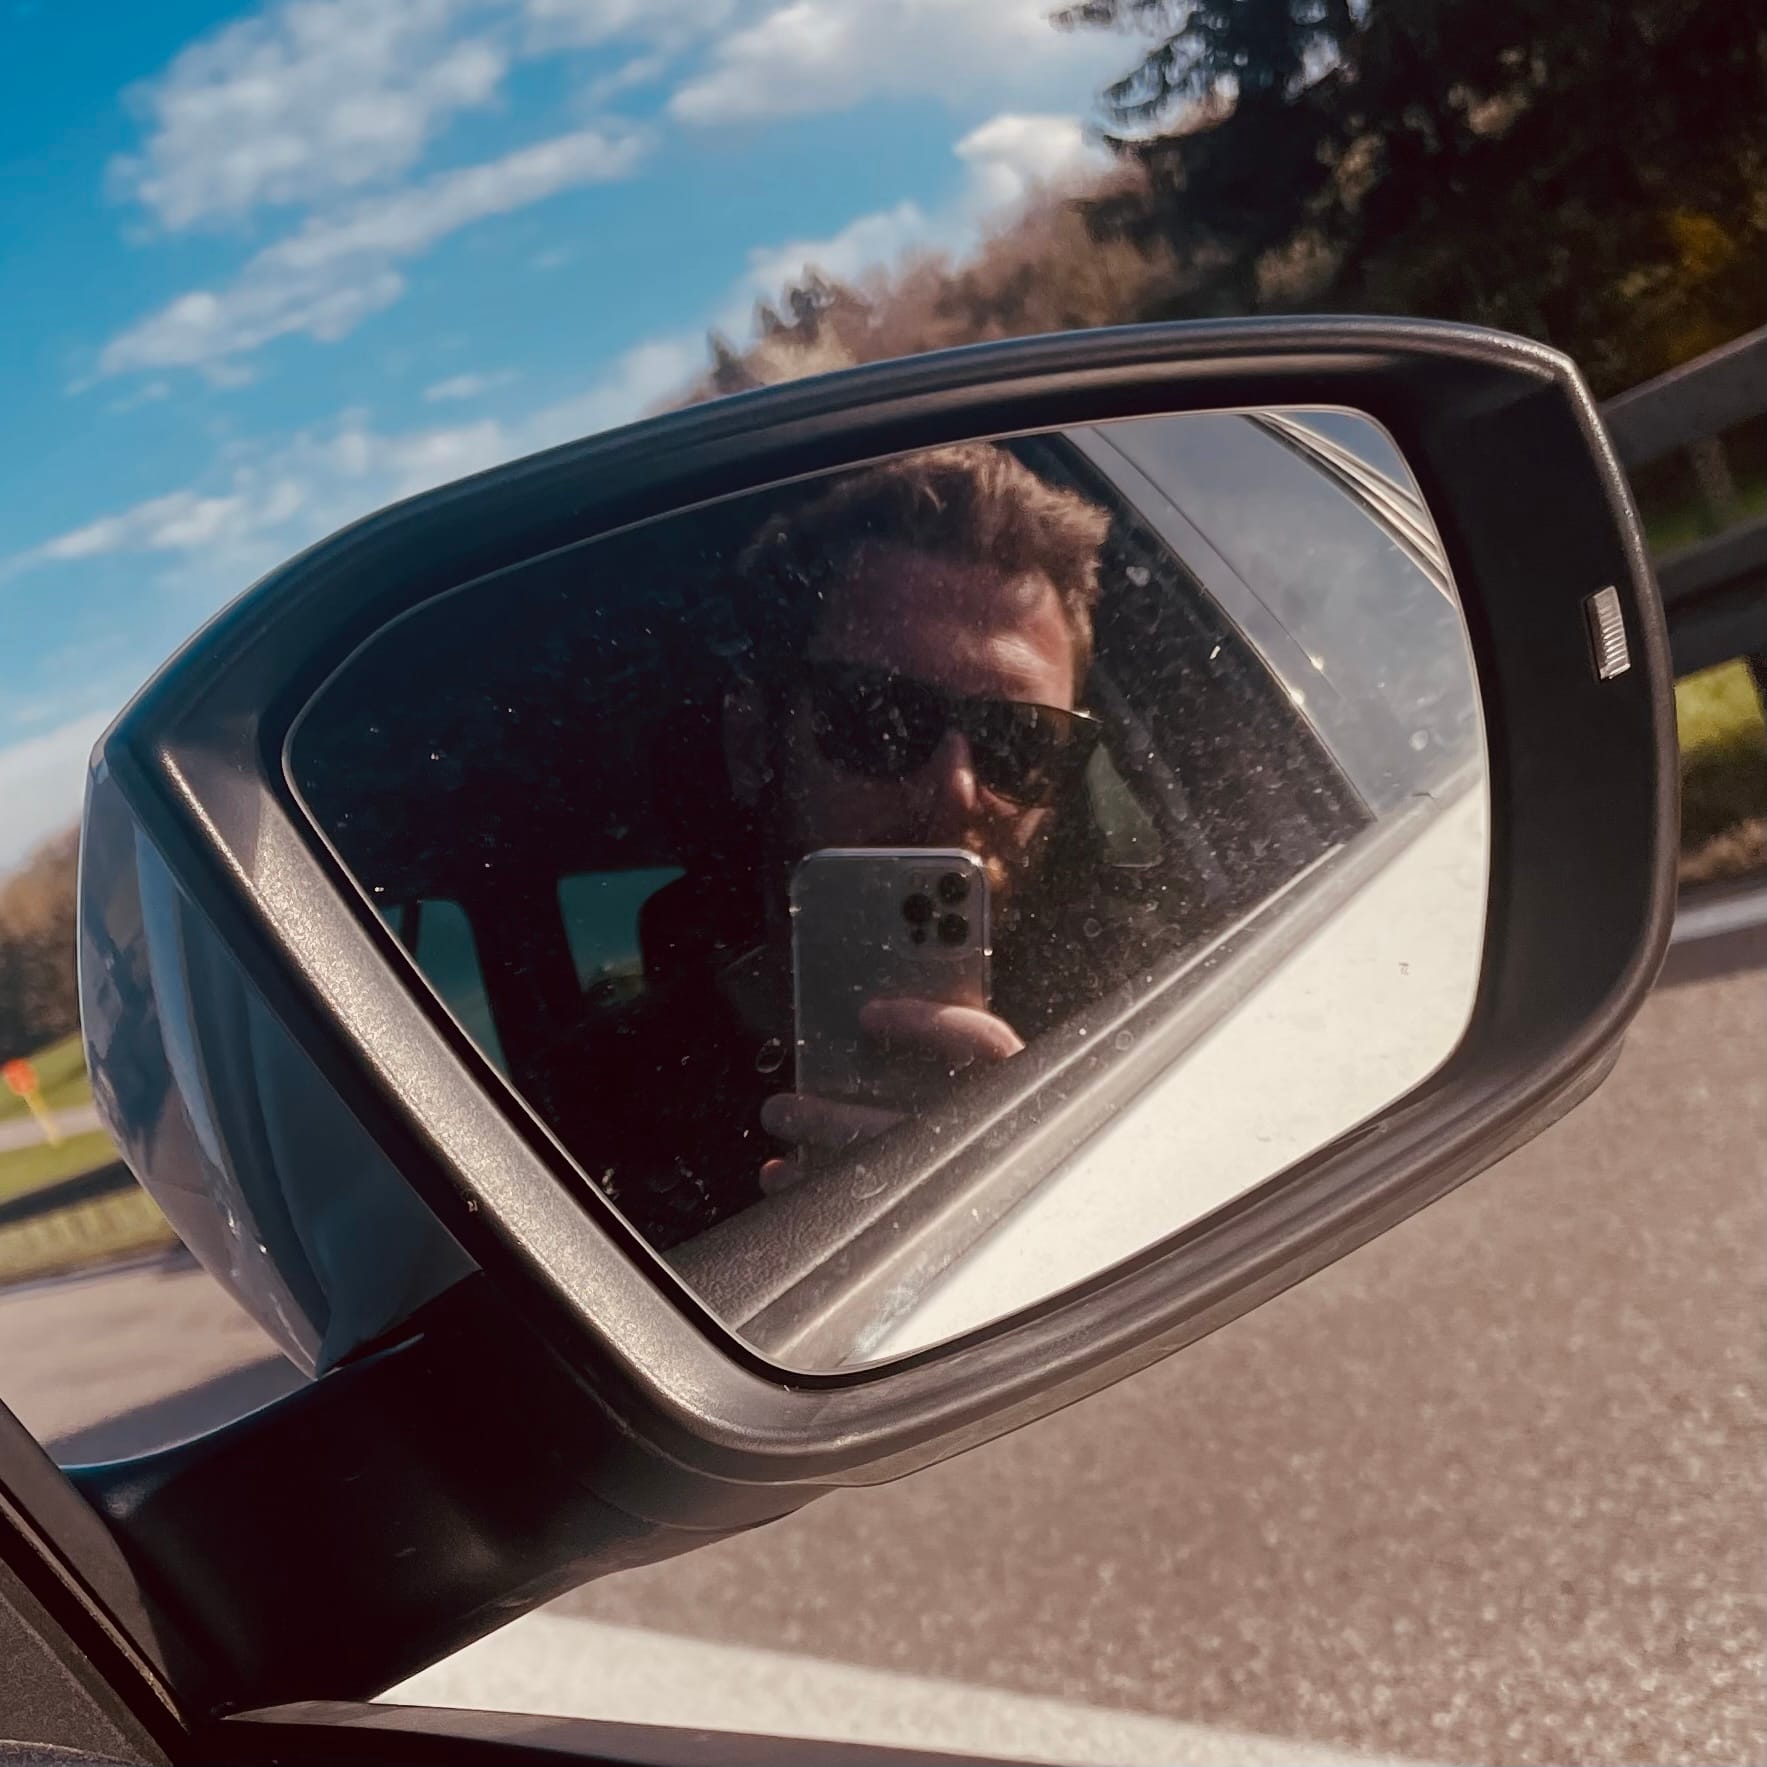 Herr Montag is looking into the mirror of a car while driving. (C) Herr Montag.